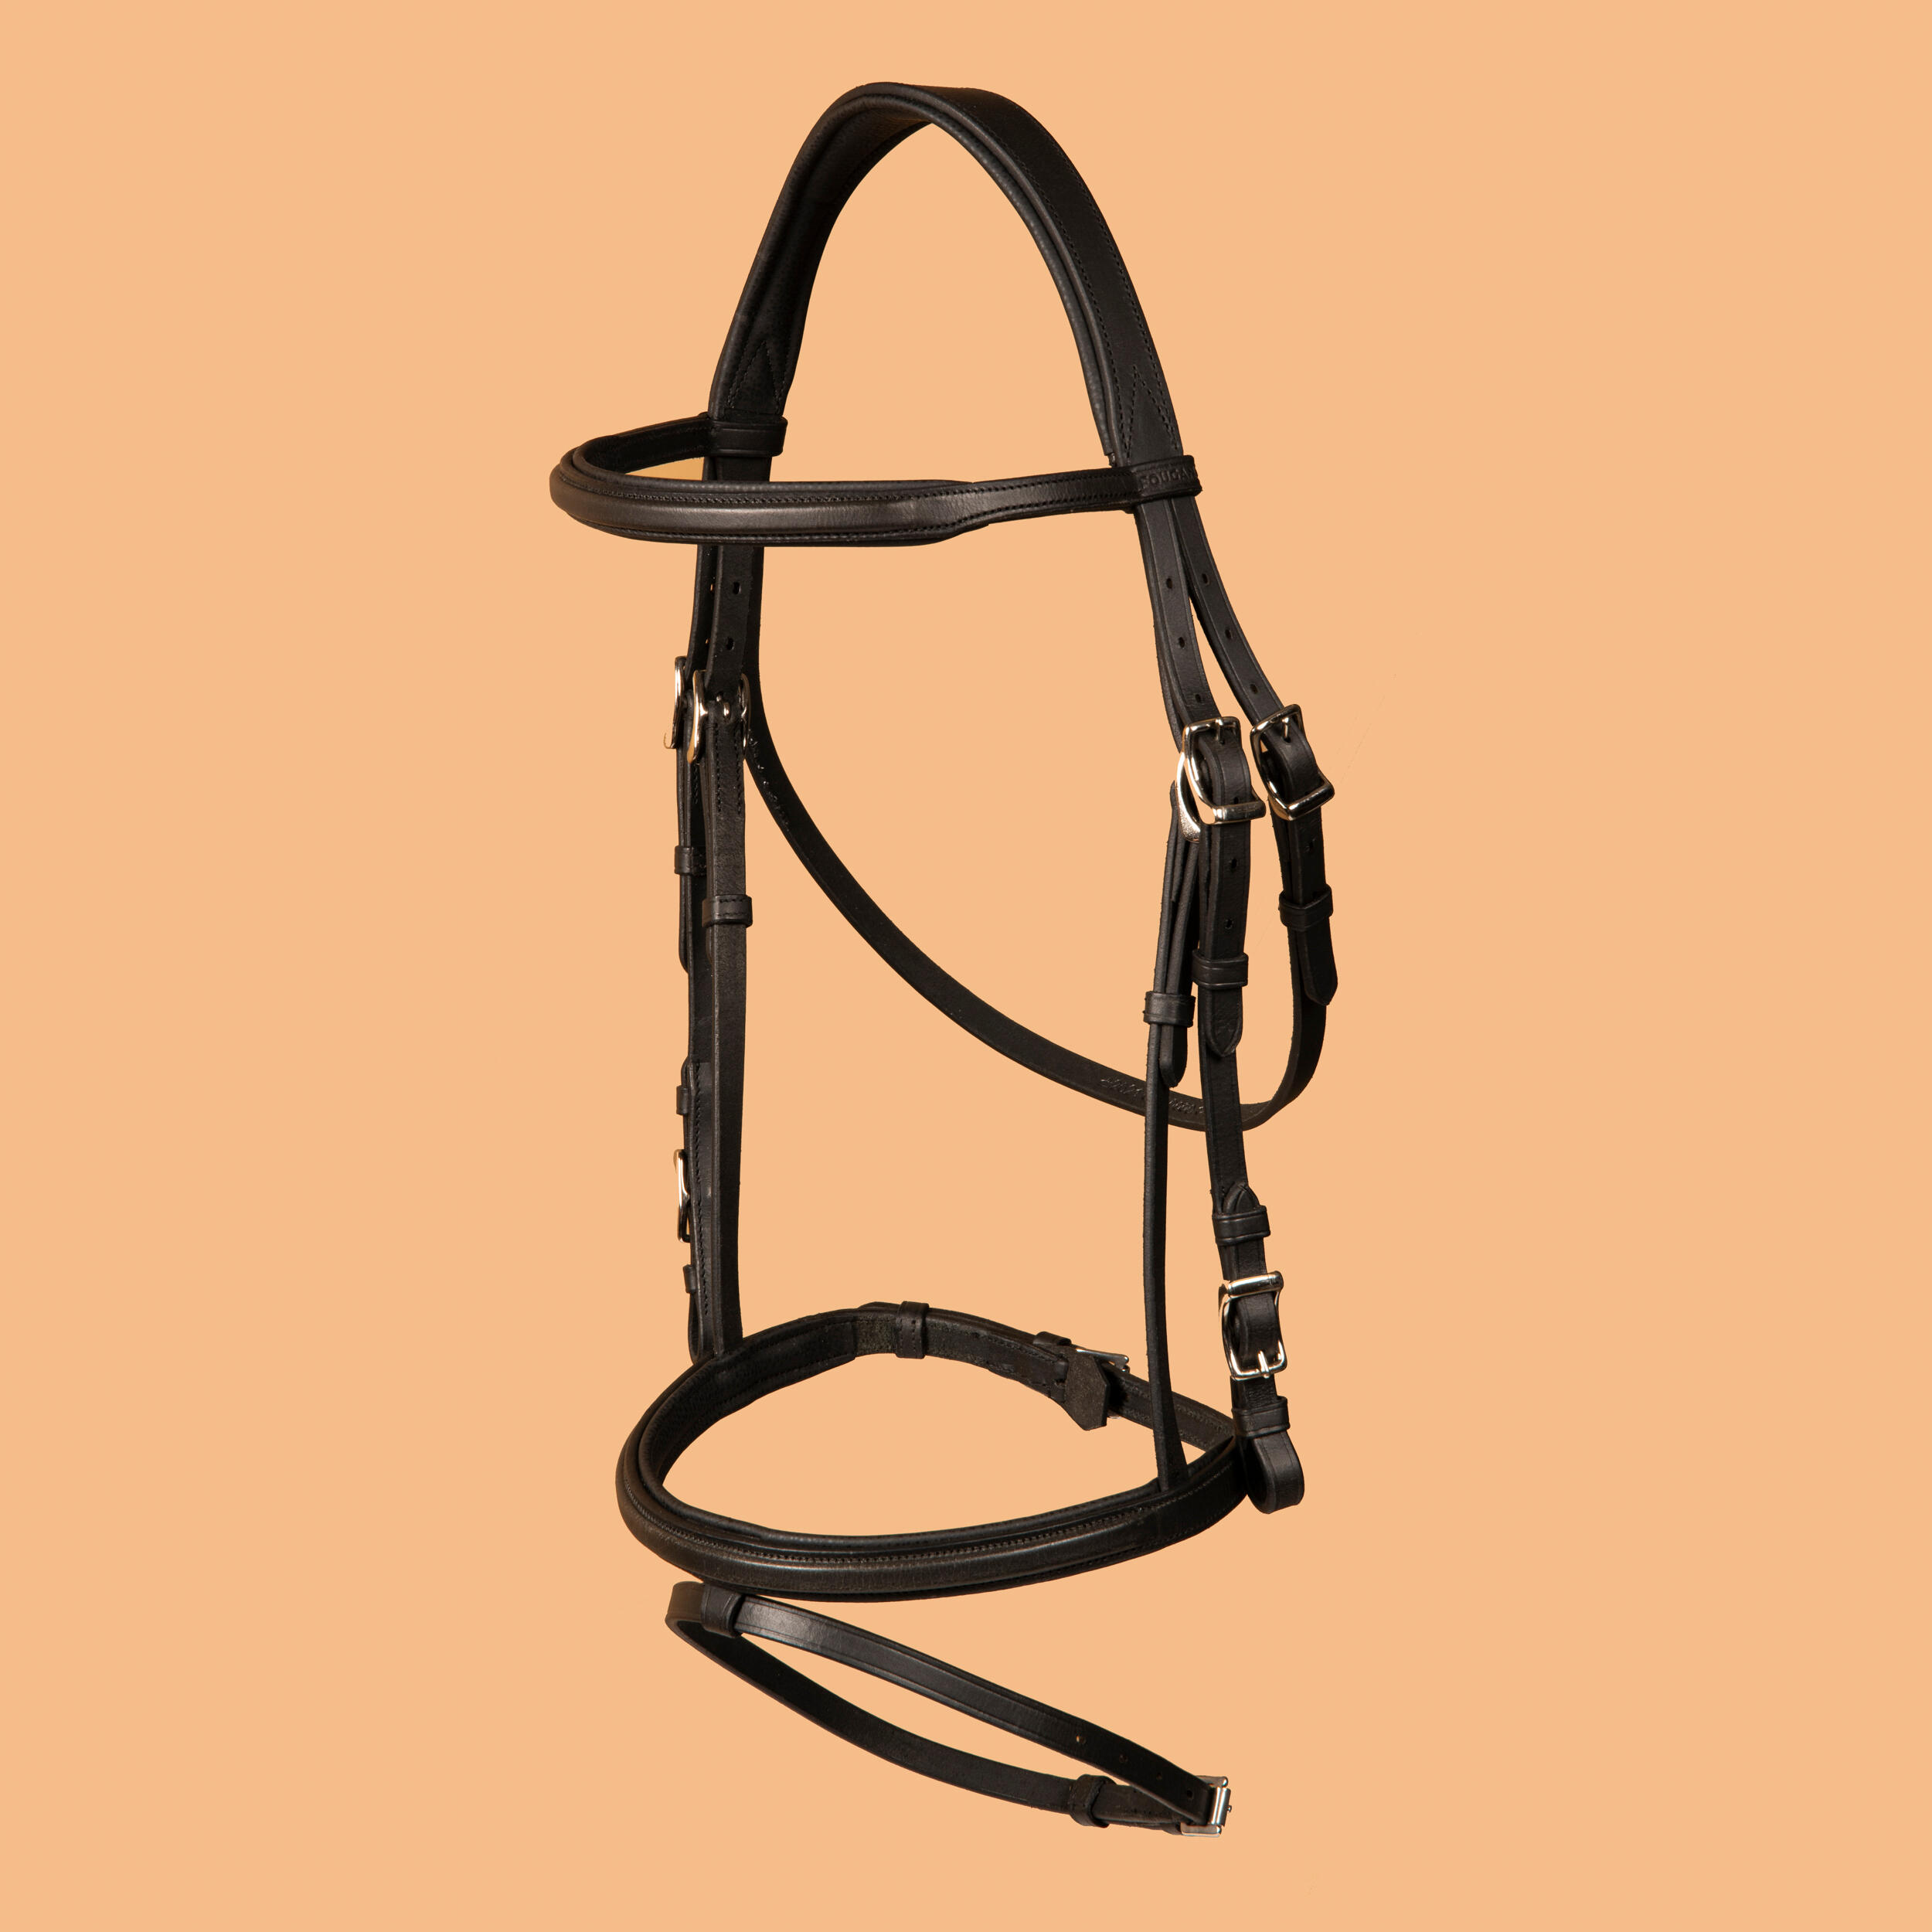 Horse Riding Leather Hybrid Bridle With French Noseband For Horse & Pony 500 1/2